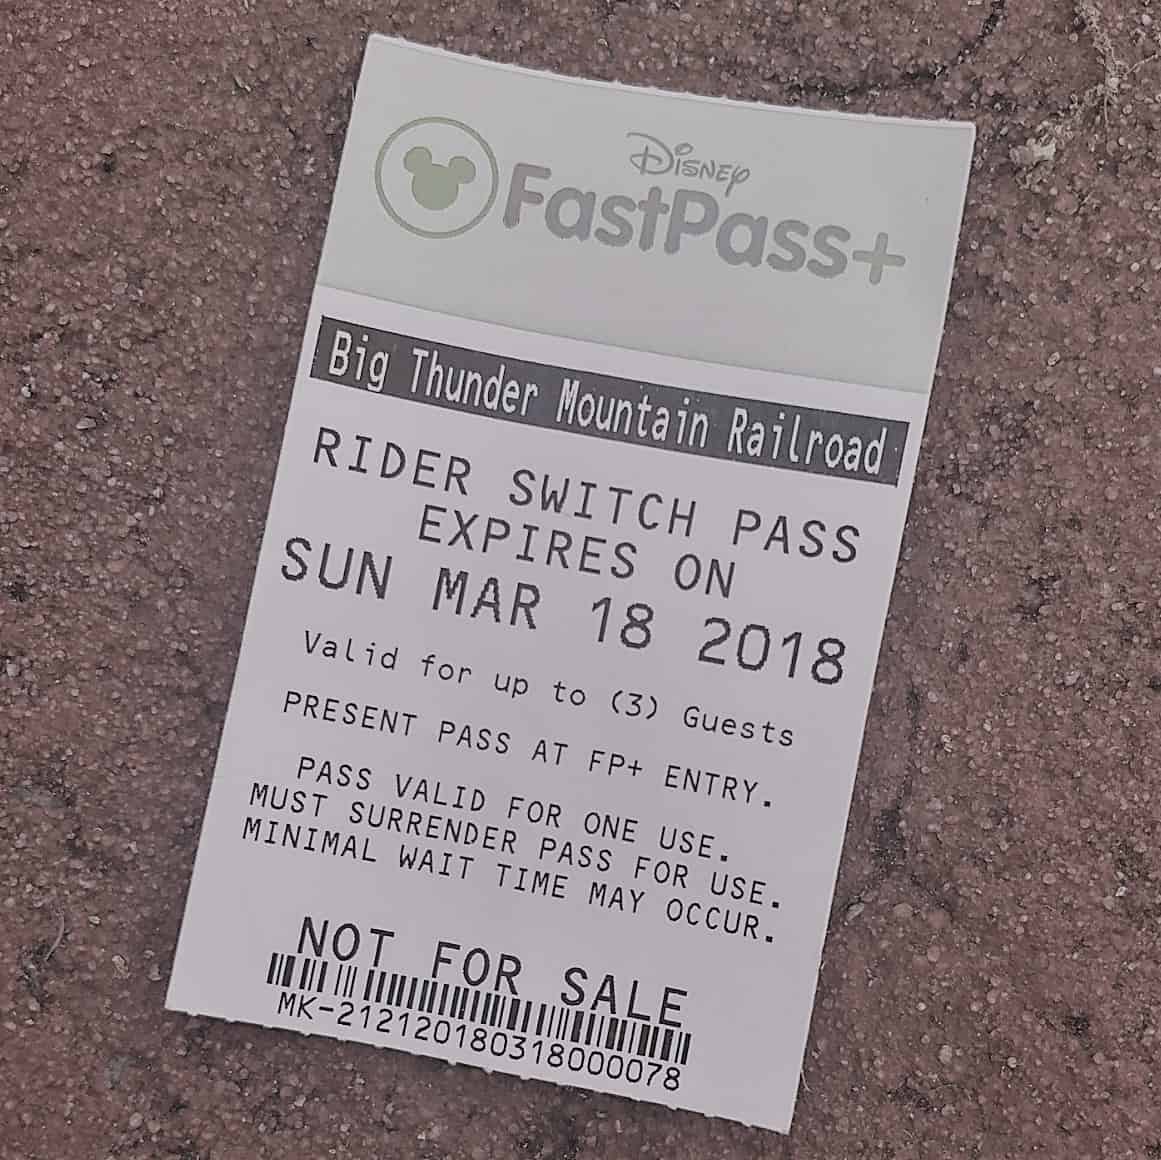 Rider Switch Pass - The ultimate guide on how to book FastPass+ for Disney World. Read more for insider tips, hacks, FastPass+ secrets to reserve the most difficult attractions at Magic Kingdom, Epcot, Animal Kingdom, and Hollywood Studios. Learn how to combine FastPass+ with Rider Switch to get even more for the family in 2018.